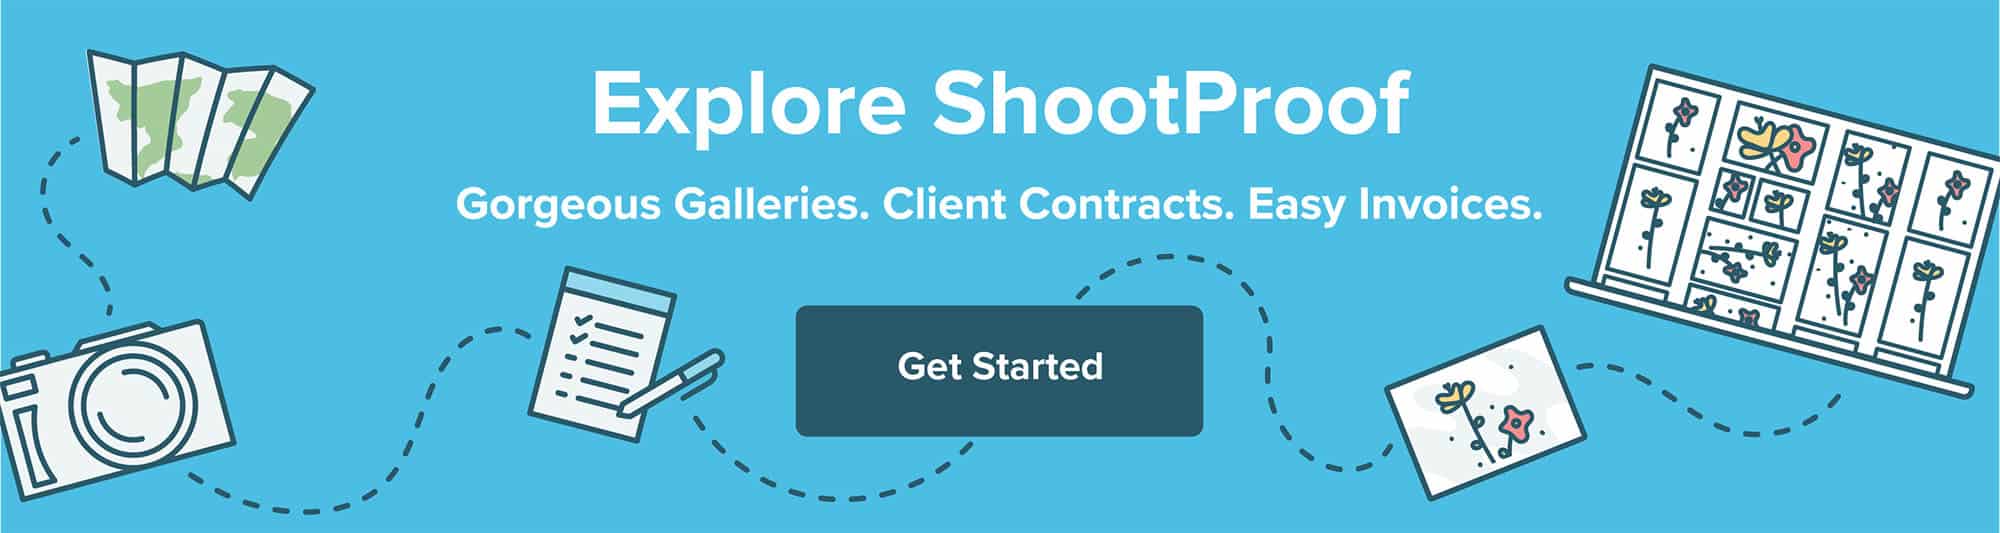 ShootProof Online Galleries. Client Contracts. Easy Invoices.